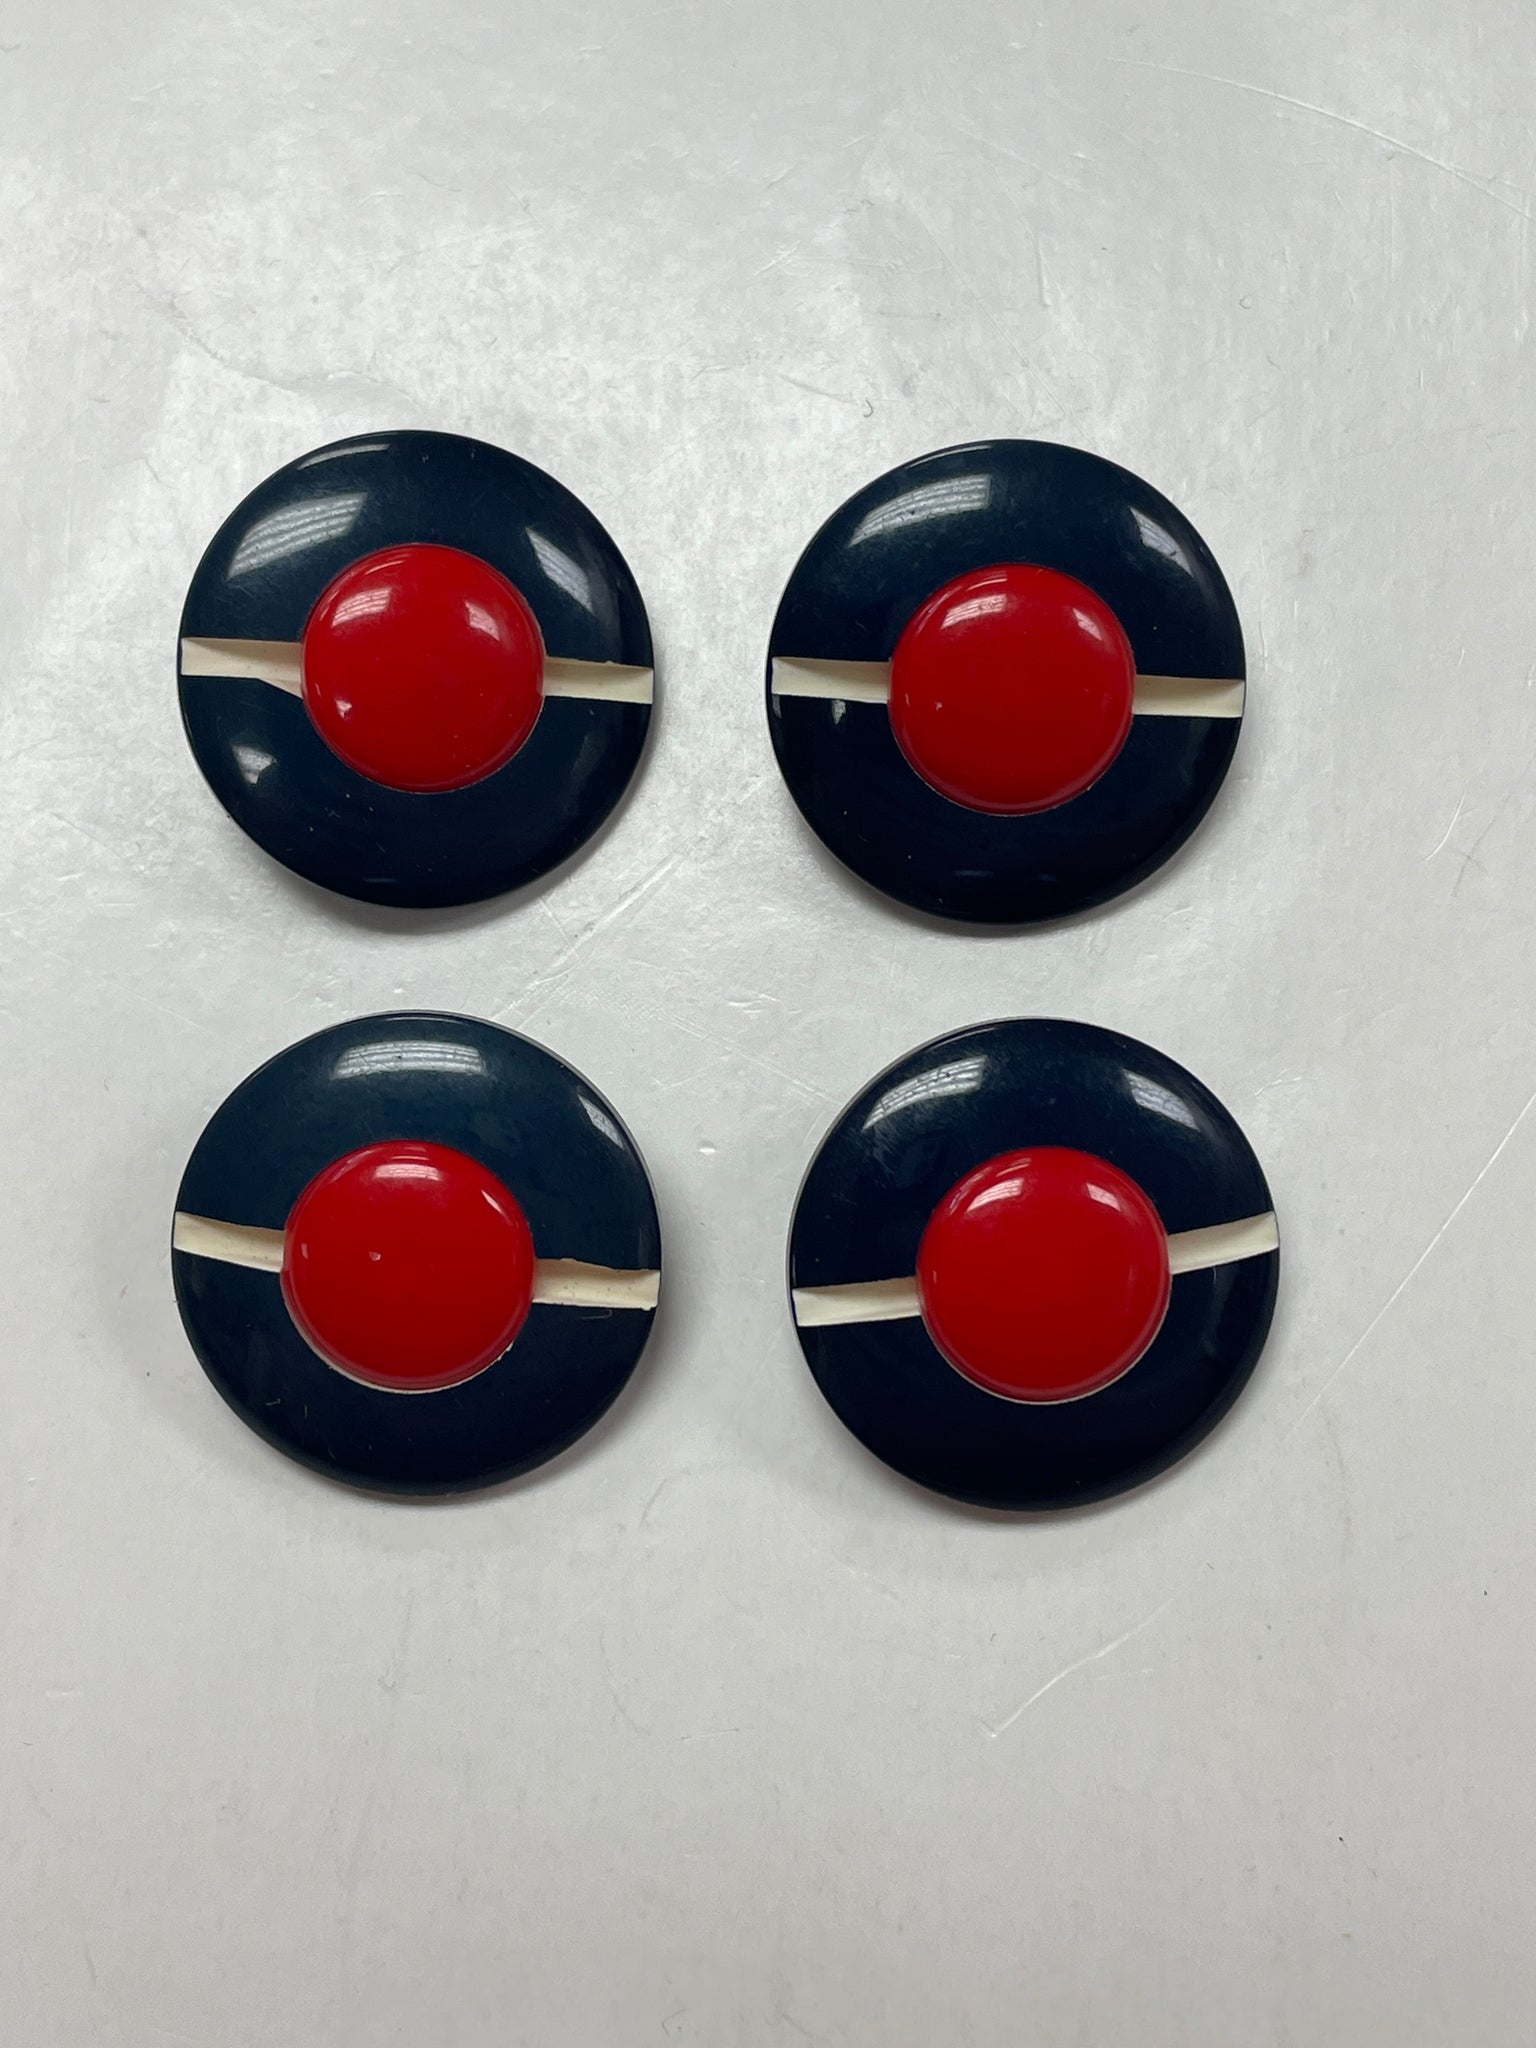 Button Set of 4 Plastic Vintage 1 1/4" - Navy Blue with Red Center